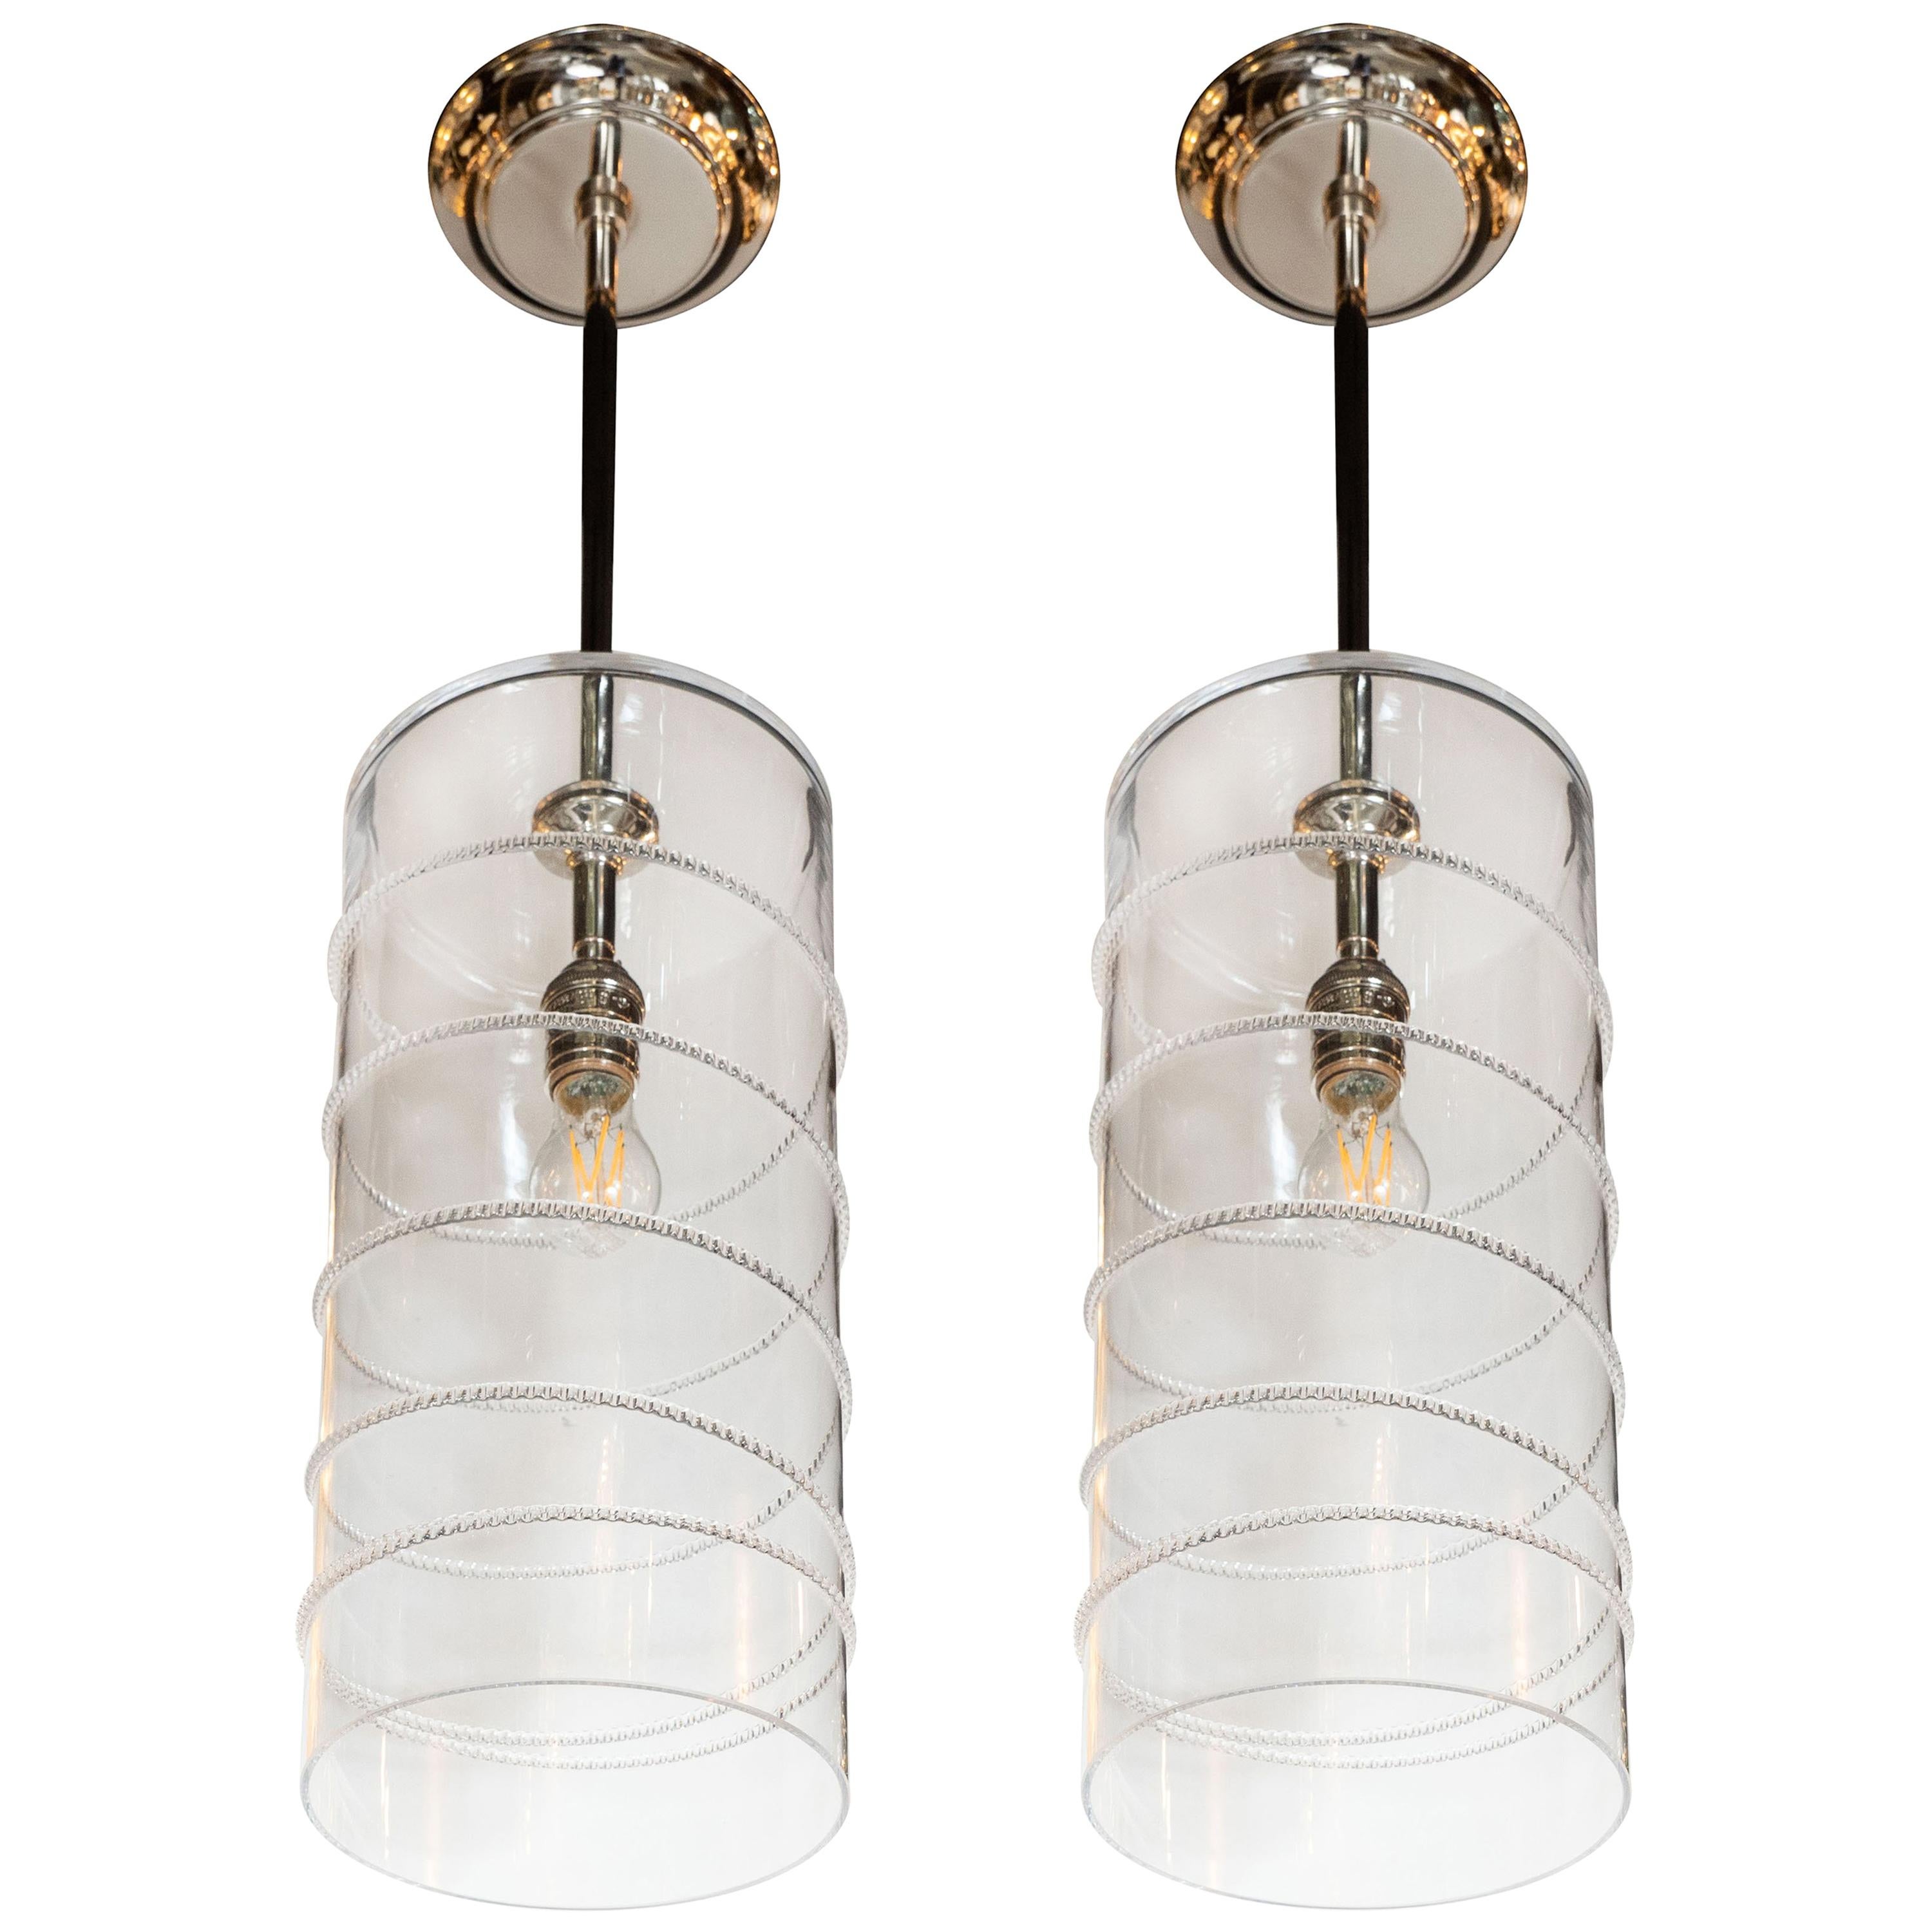 Pair of Modernist Handblown Translucent Glass Pendants with Chrome Fittings